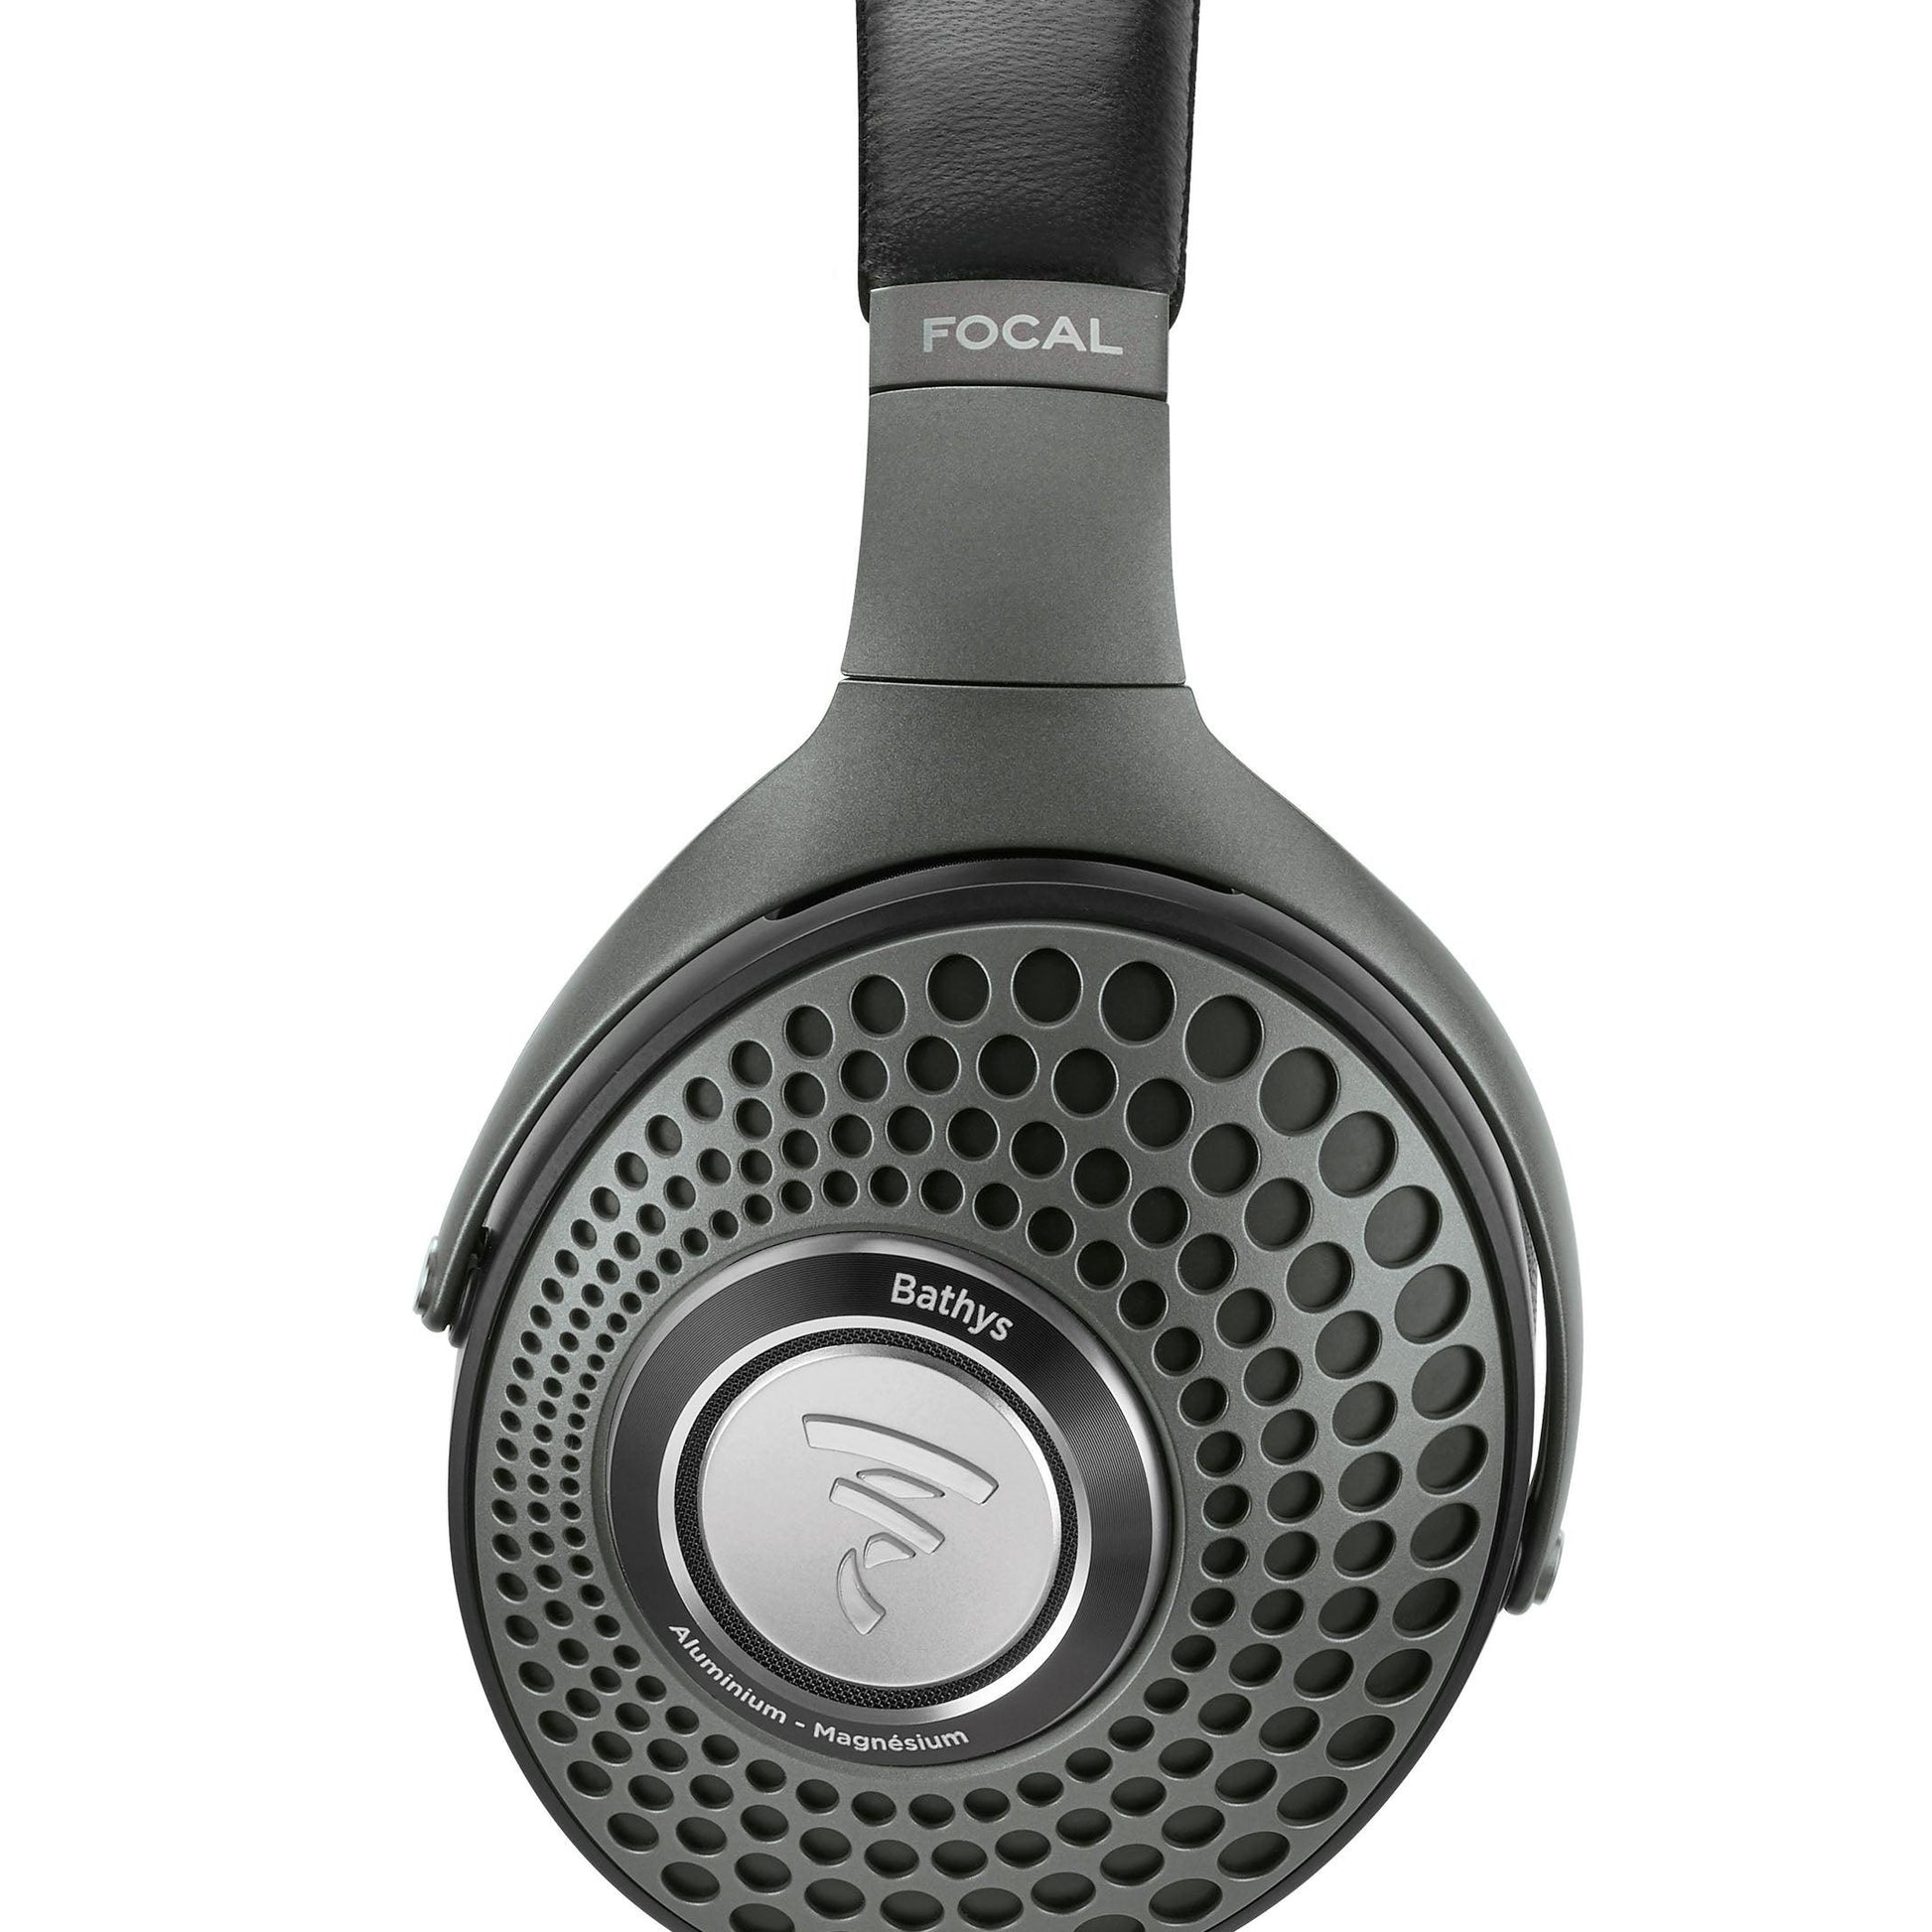 Left-side view of Focal Bathys wireless noise-cancelling bluetooth audiophile headphones